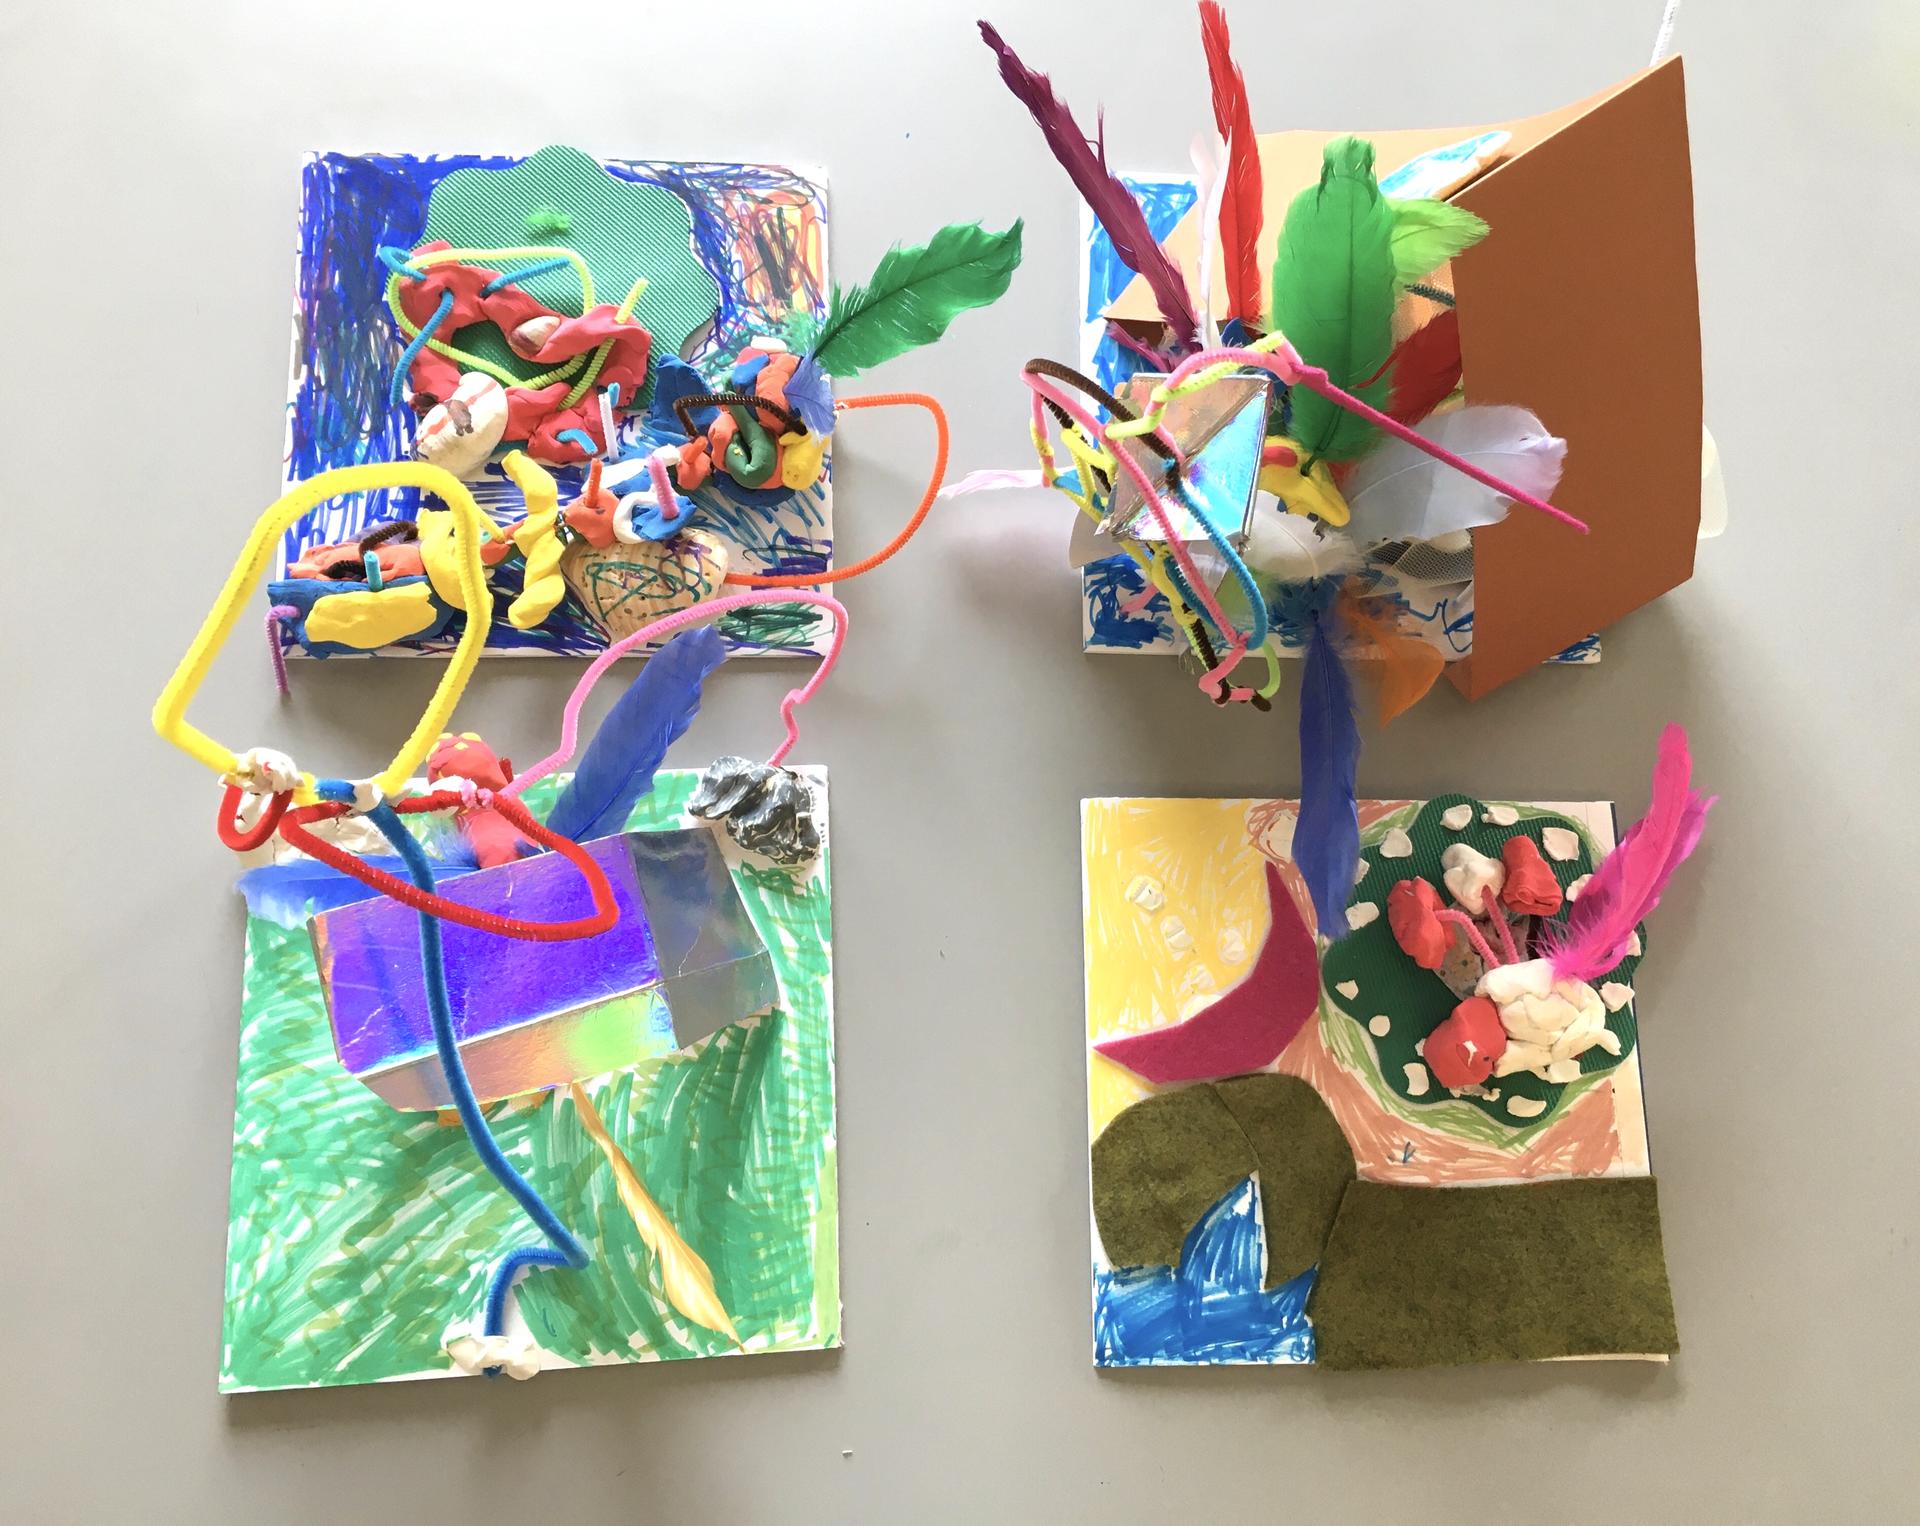 Four "habitats" built on square pieces of foam core, colorful air dry clay, pipe cleaners, shells, feathers, repurposed fabrics and paper, marker. Each habitat is constructed and colored in its own way, with some elements extending upwards towards the camera. 